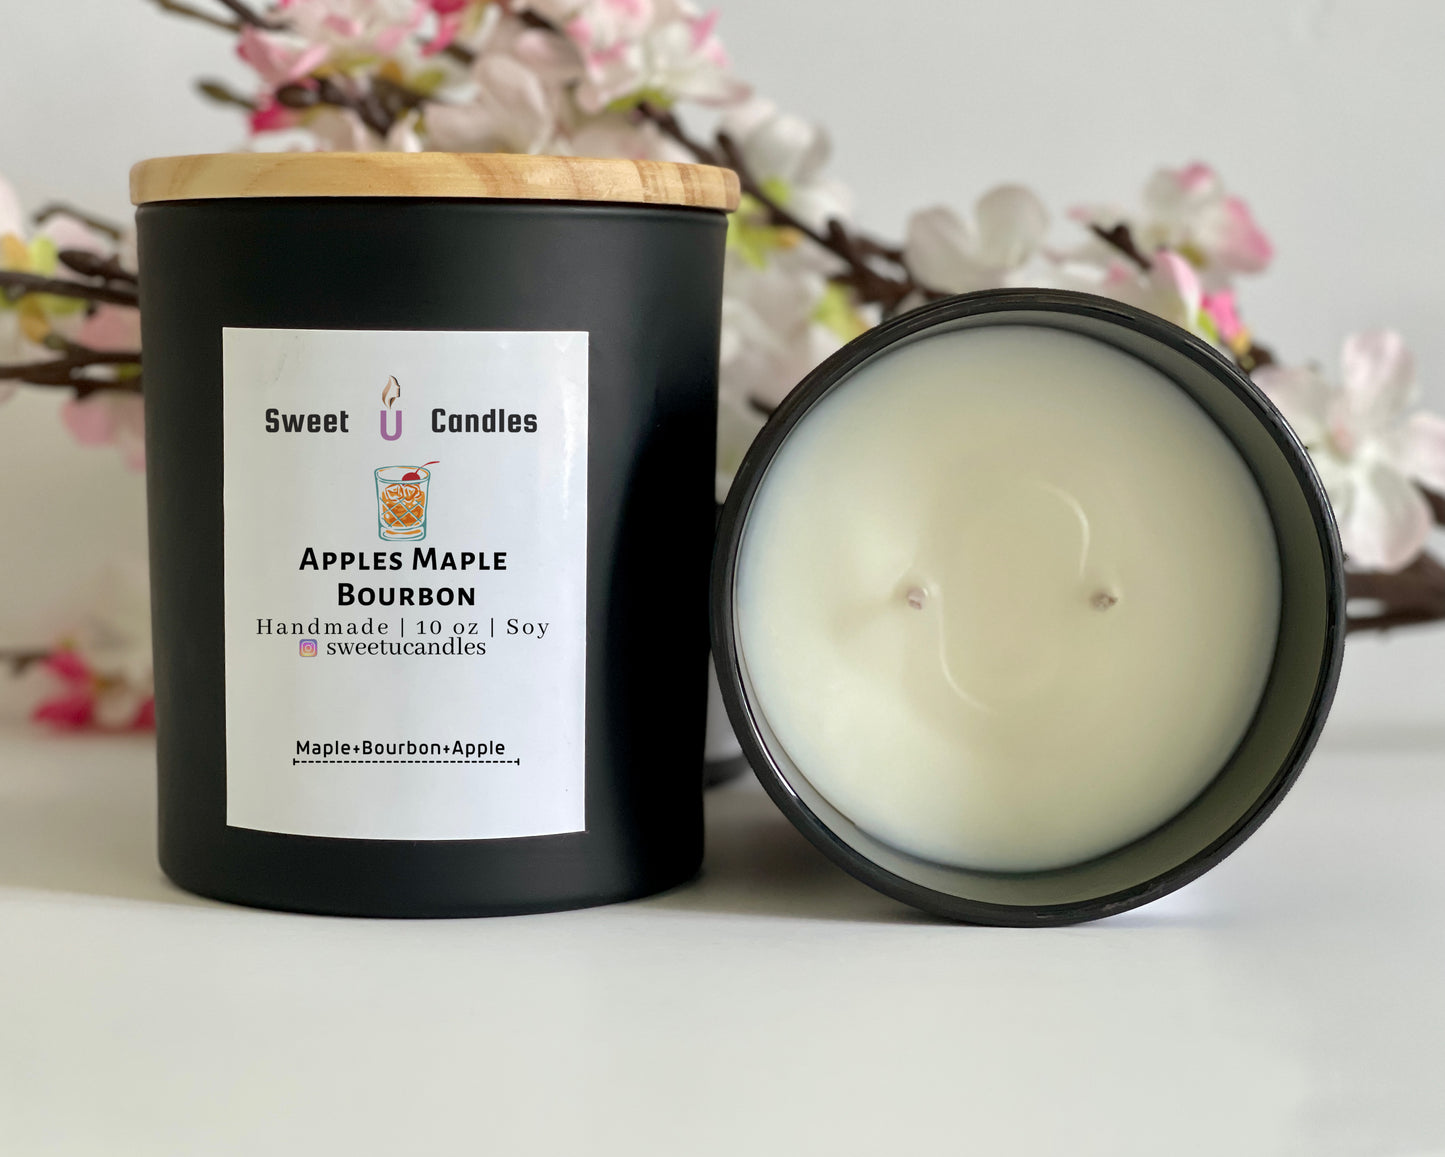 Apple and Maple Bourbon - Sweet U Candles 